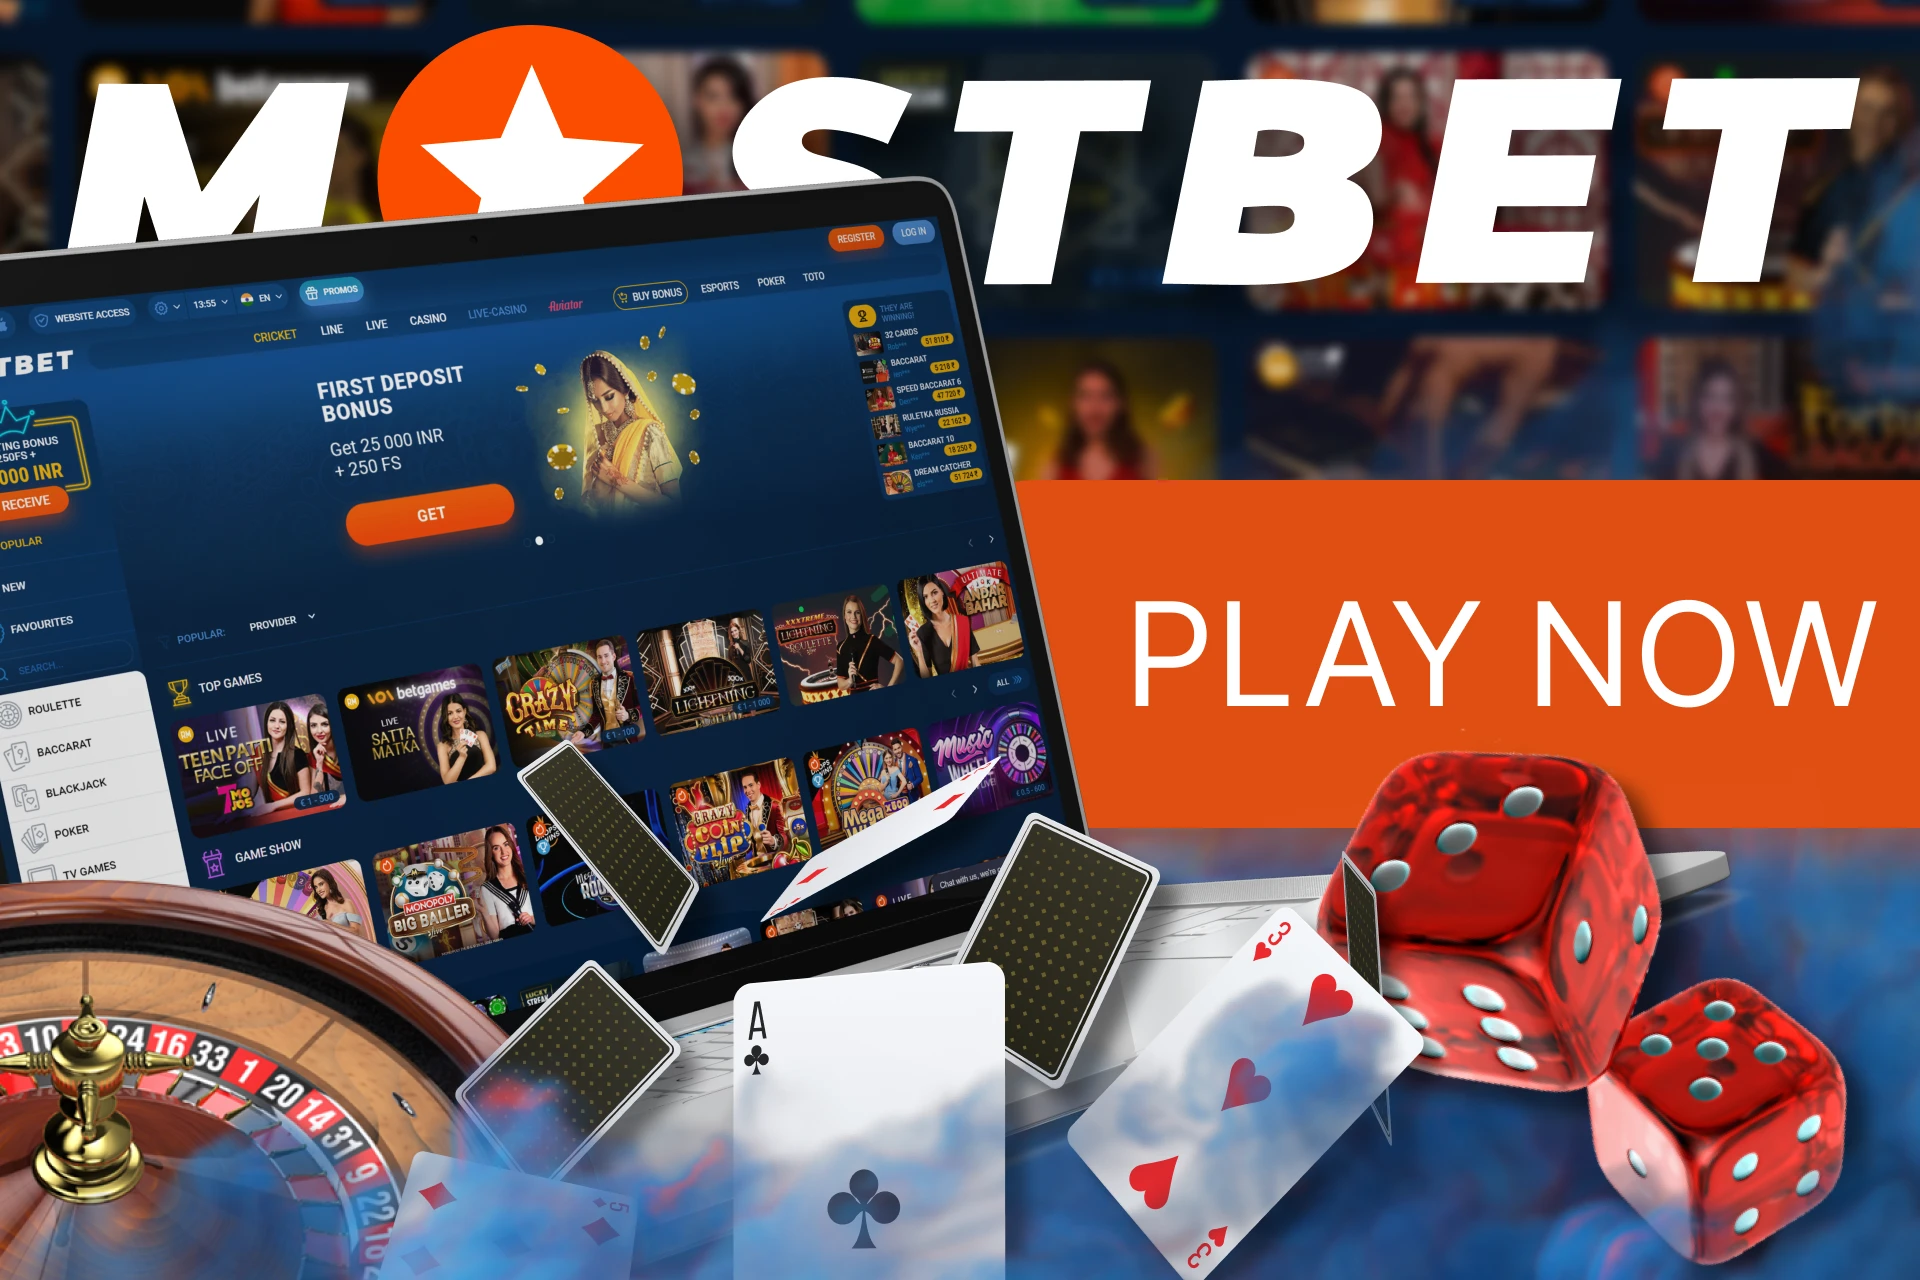 Learn more about Mostbet Live Casino.